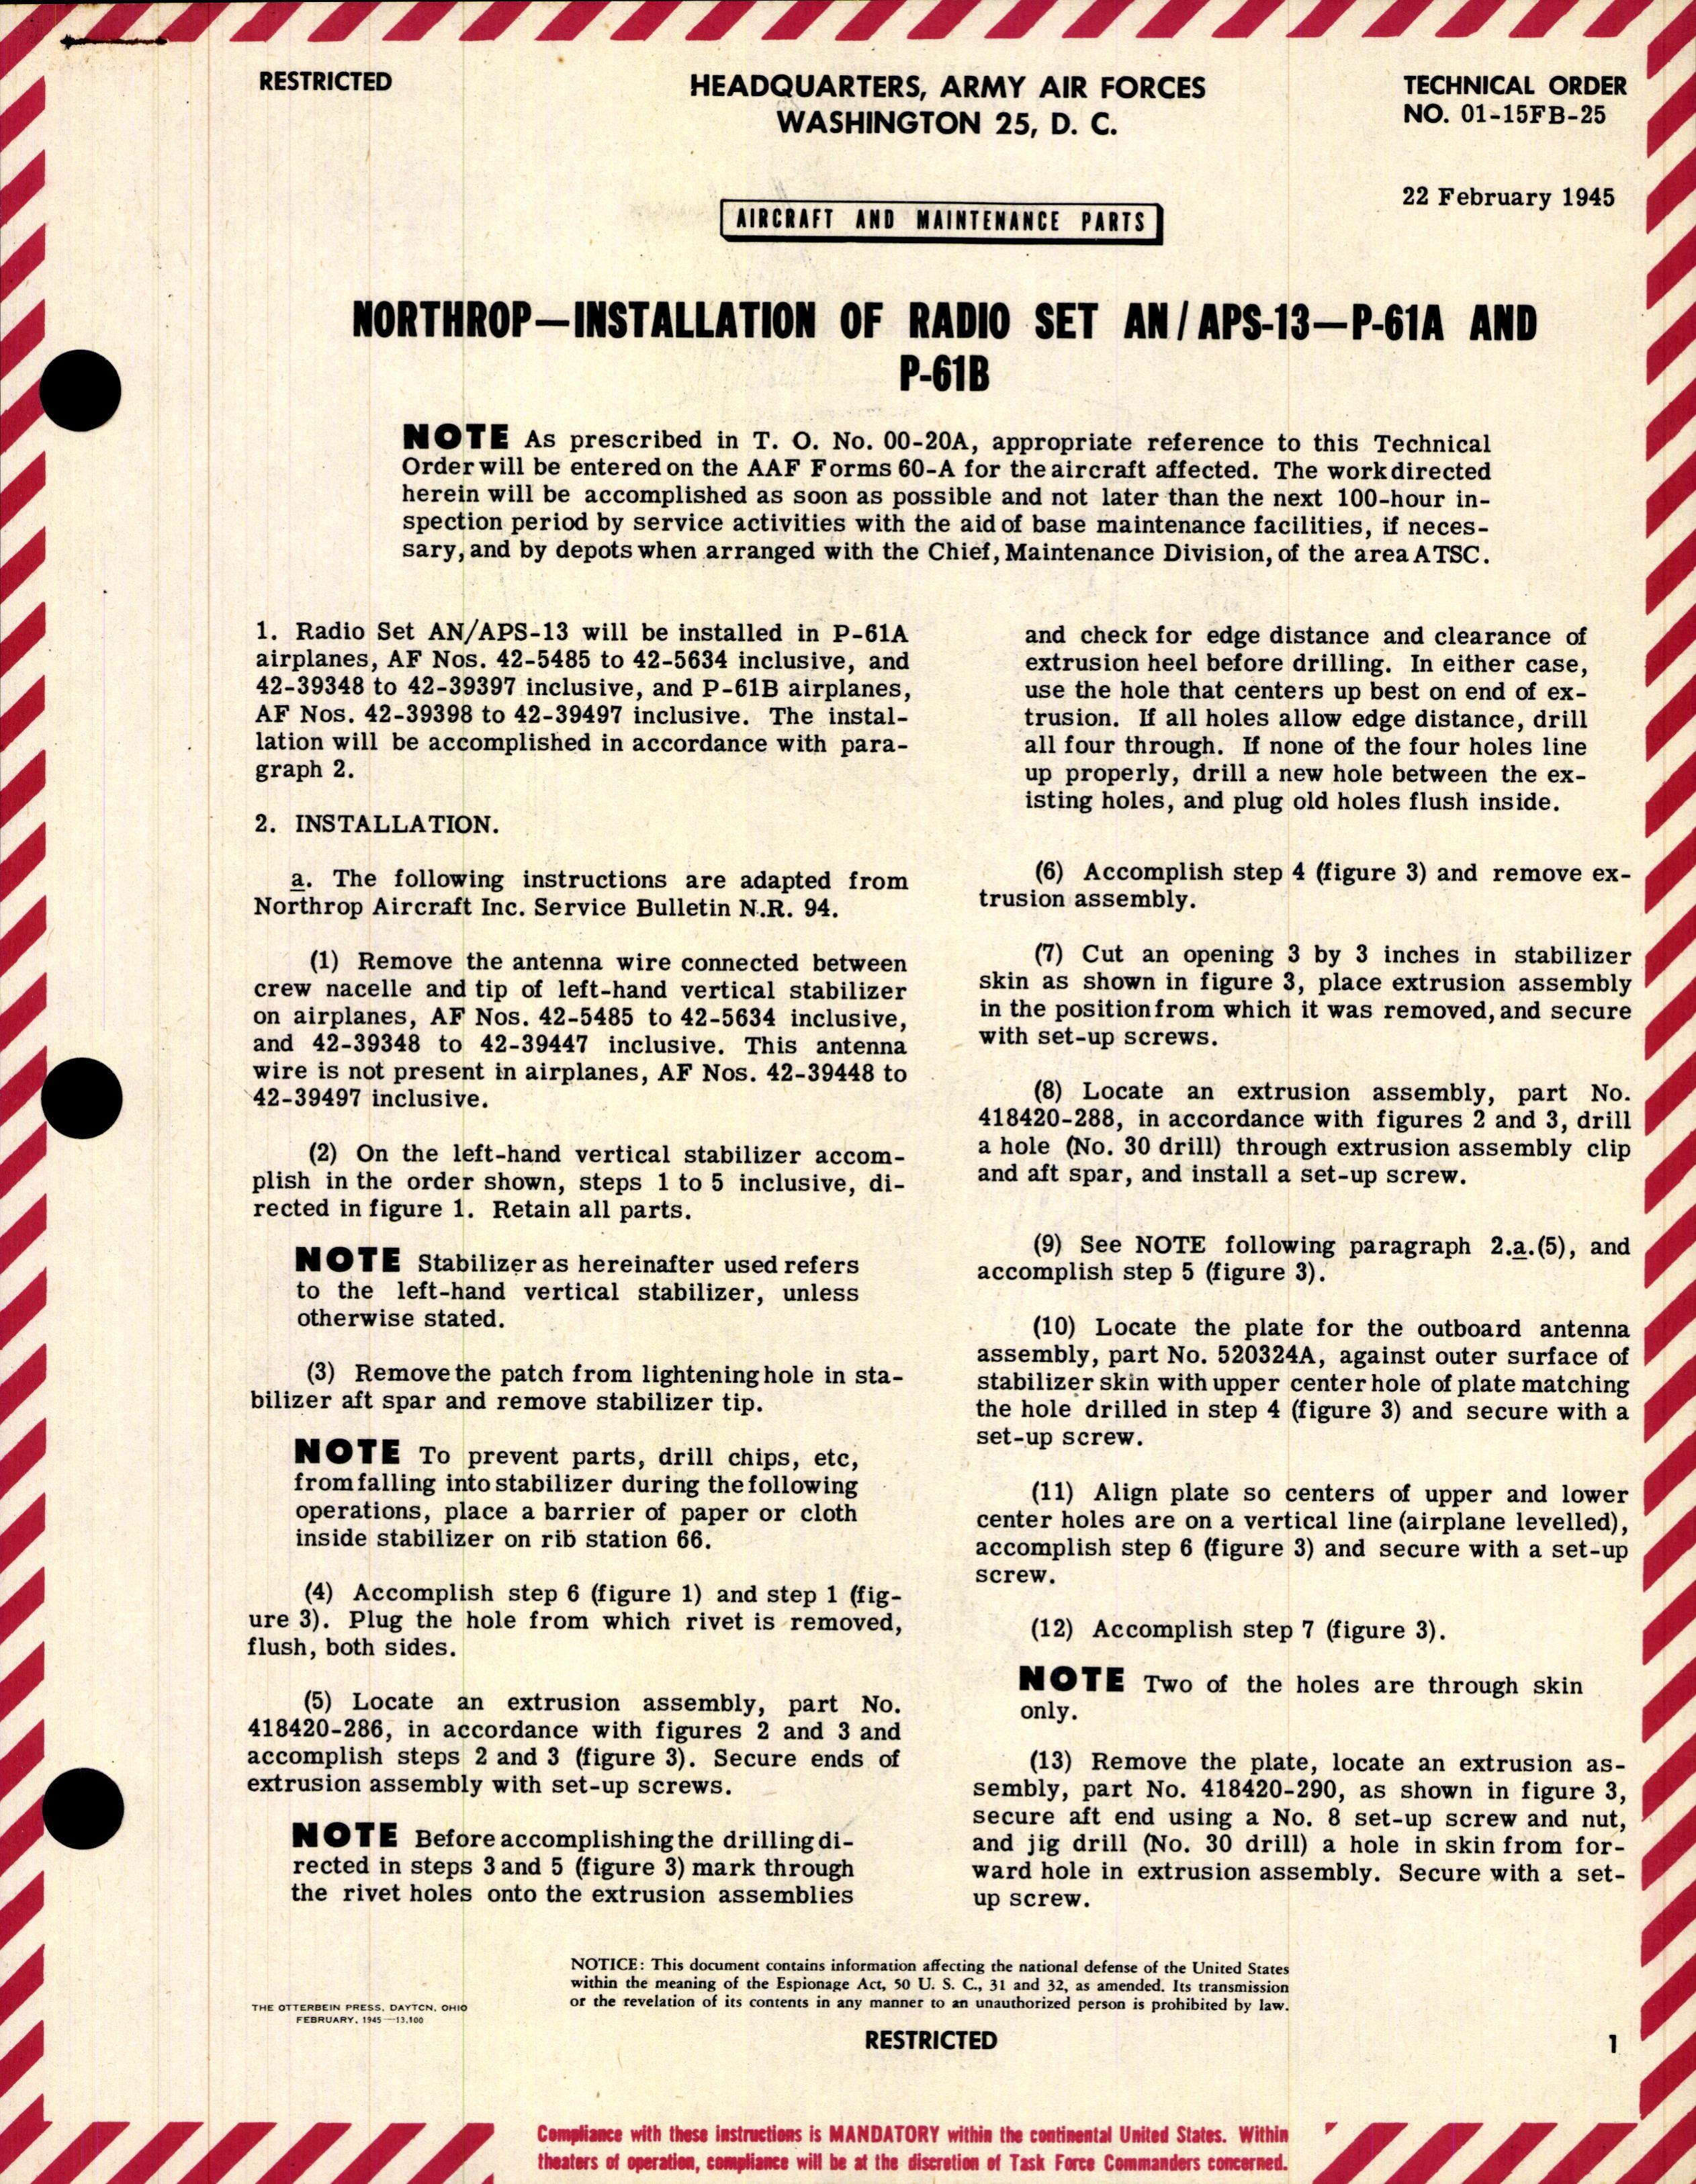 Sample page 1 from AirCorps Library document: Installation of Radio Set AN/APS-13 for P-61A and P-61B